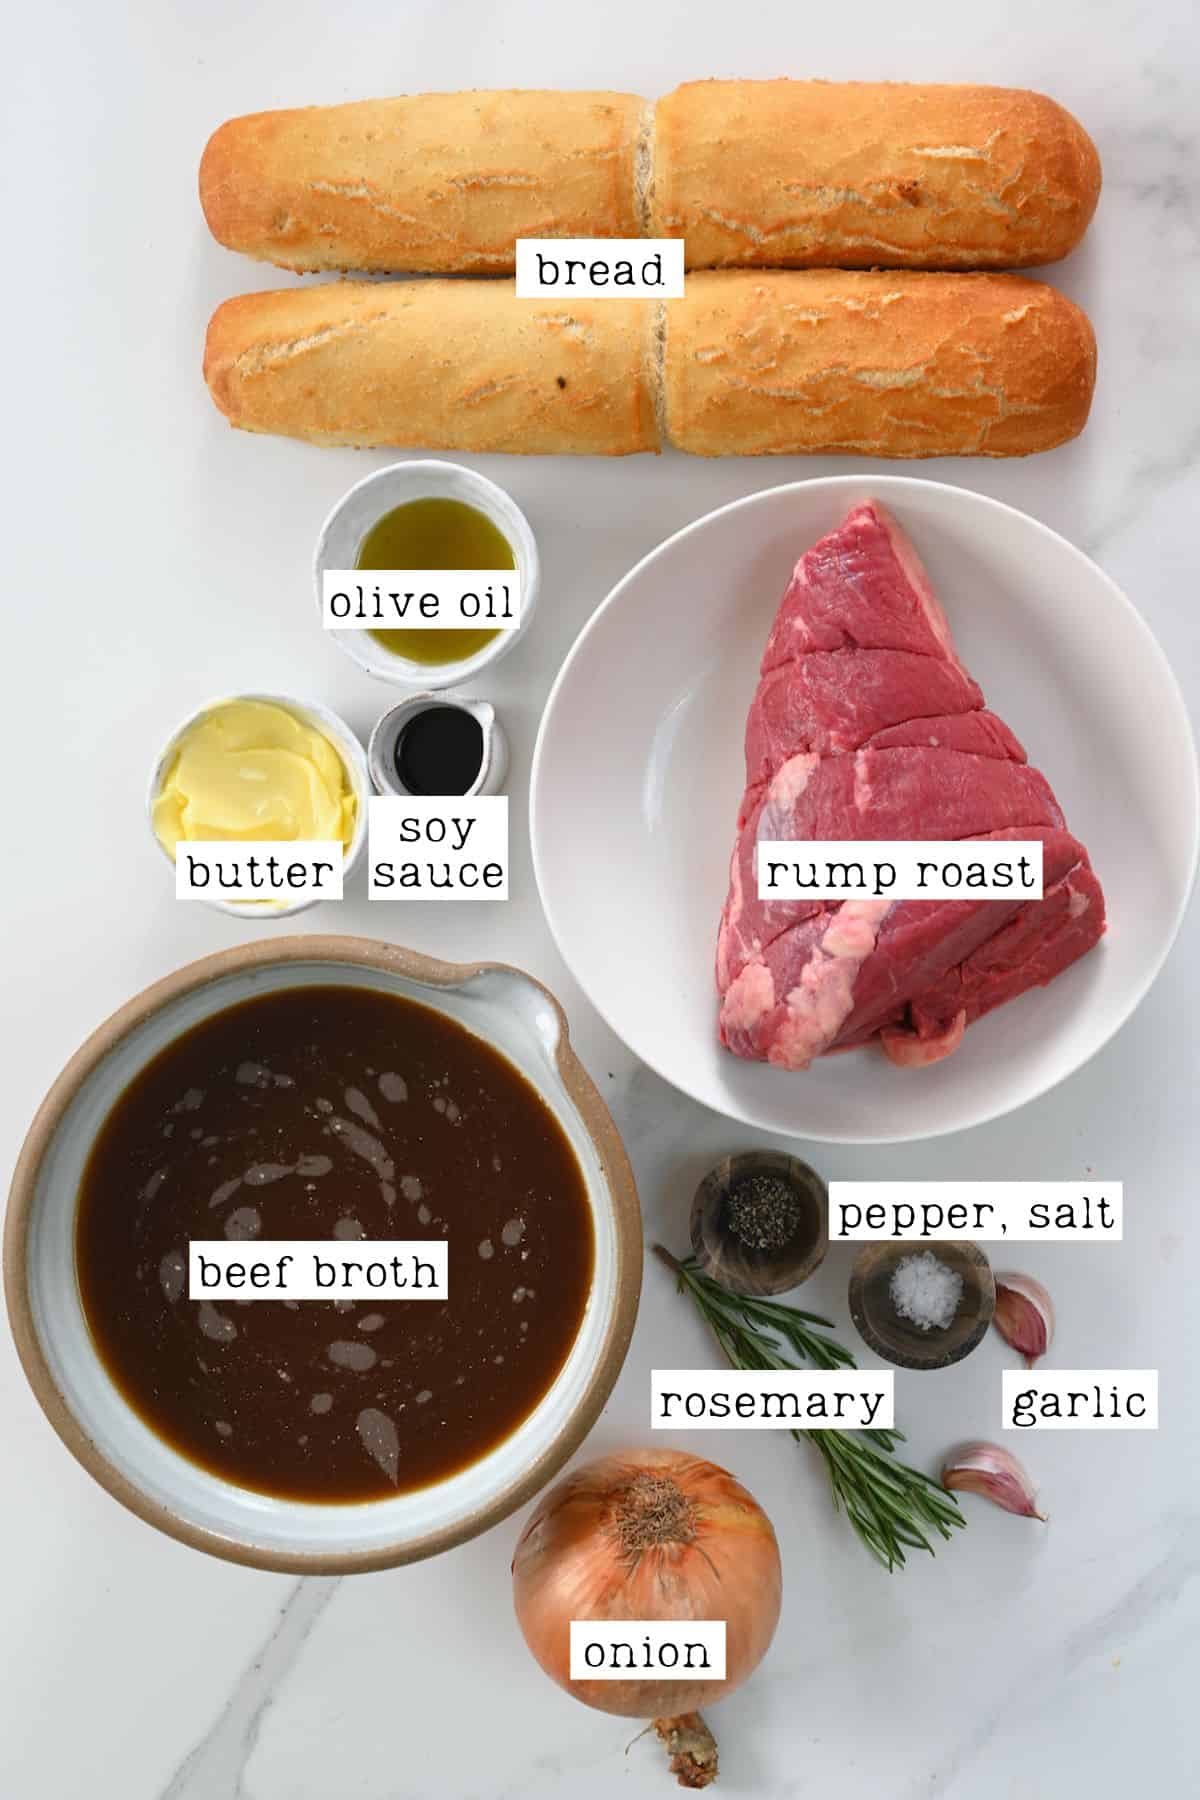 Ingredients for French Dip sandwich